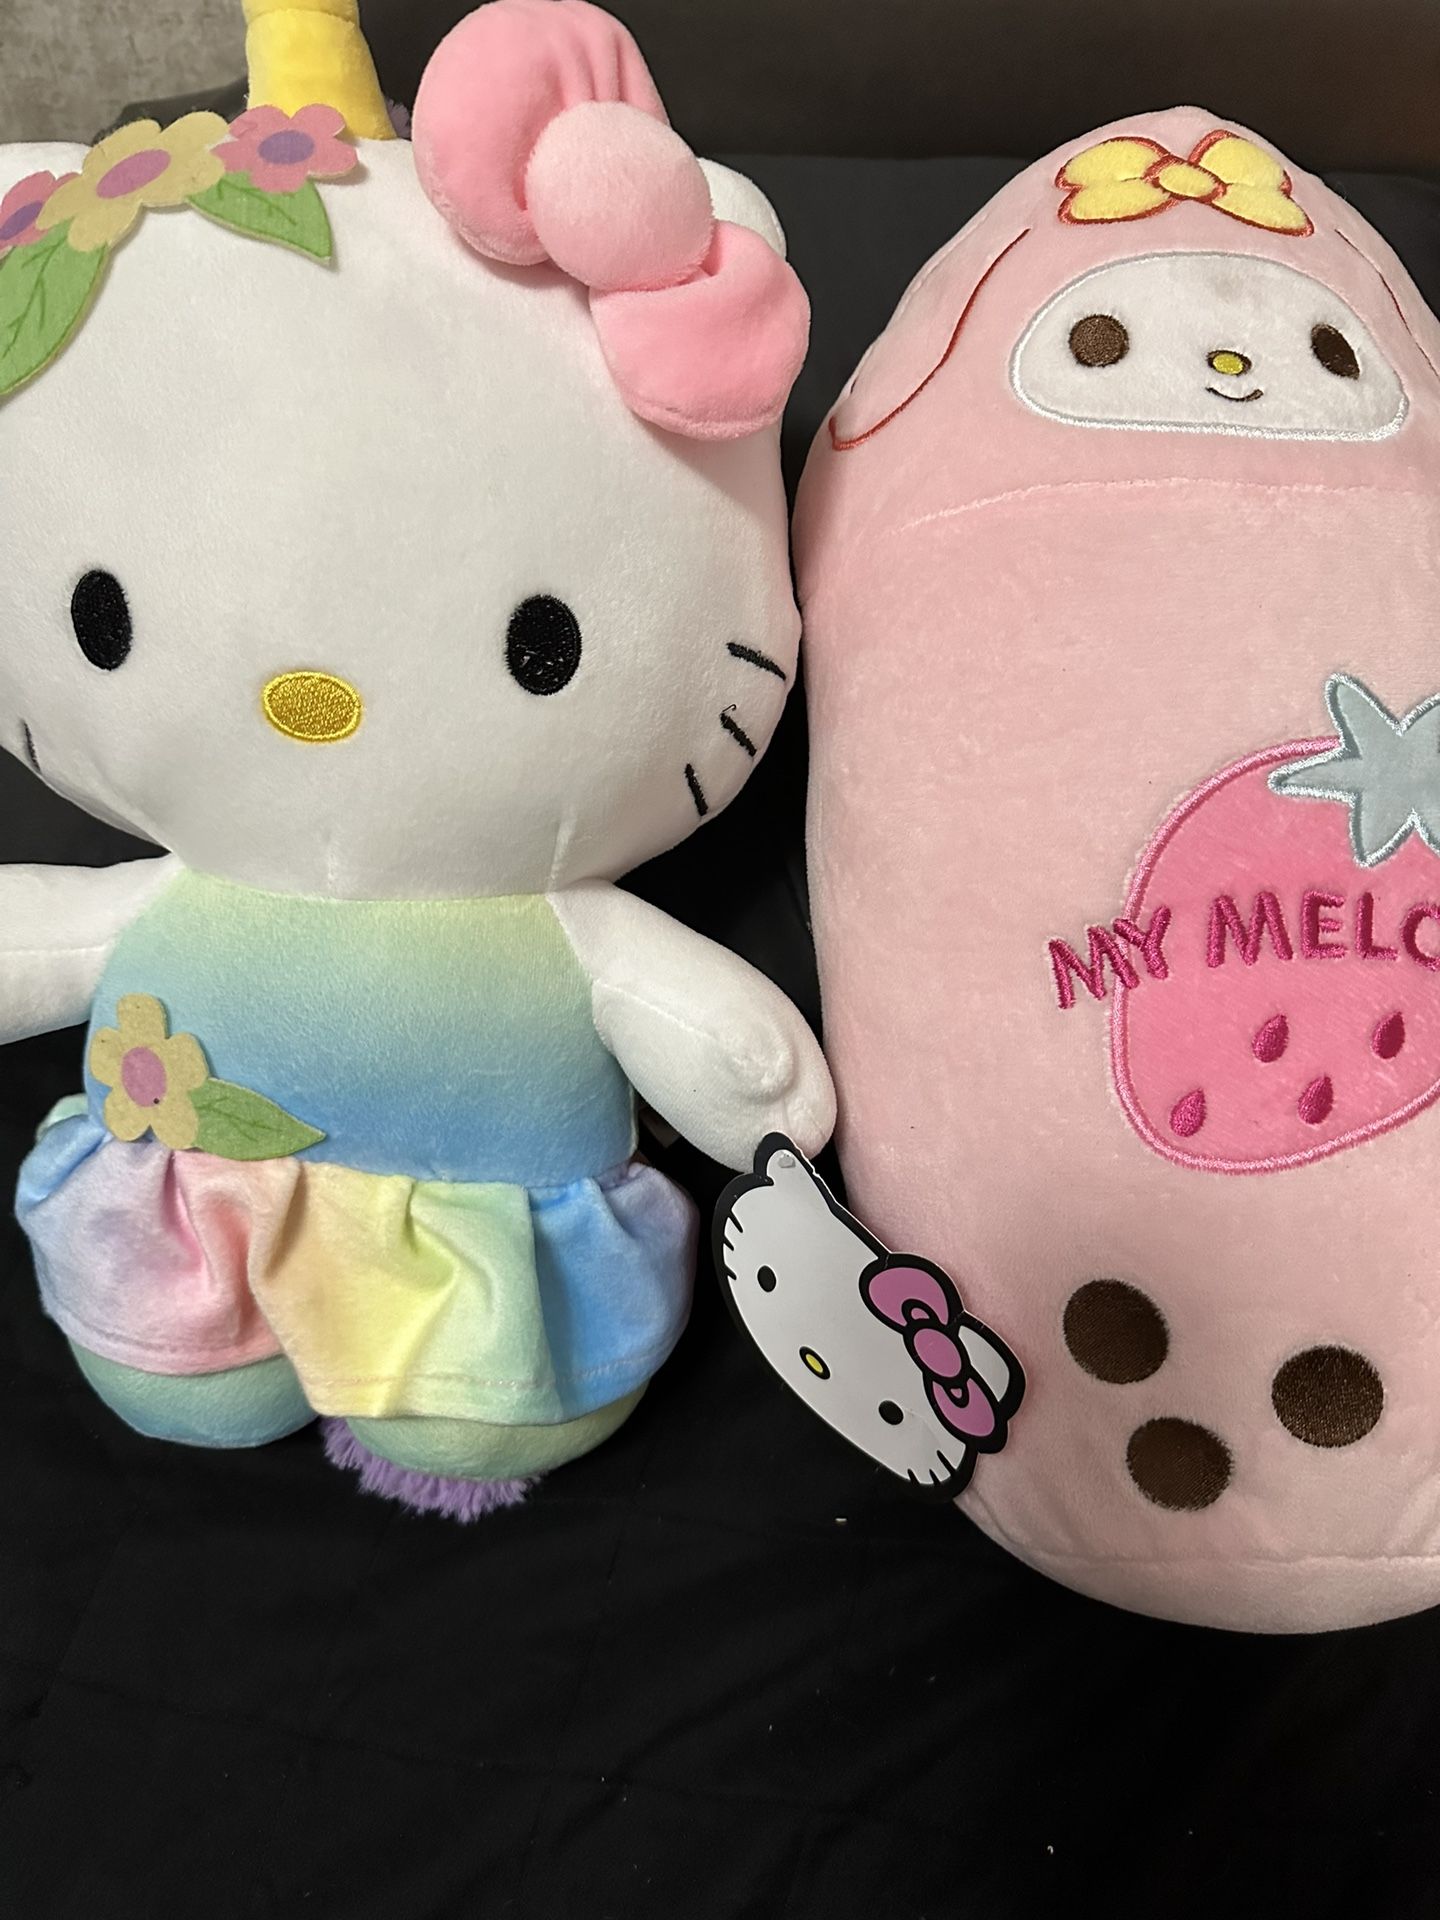 Hello kitty and my melody plushes